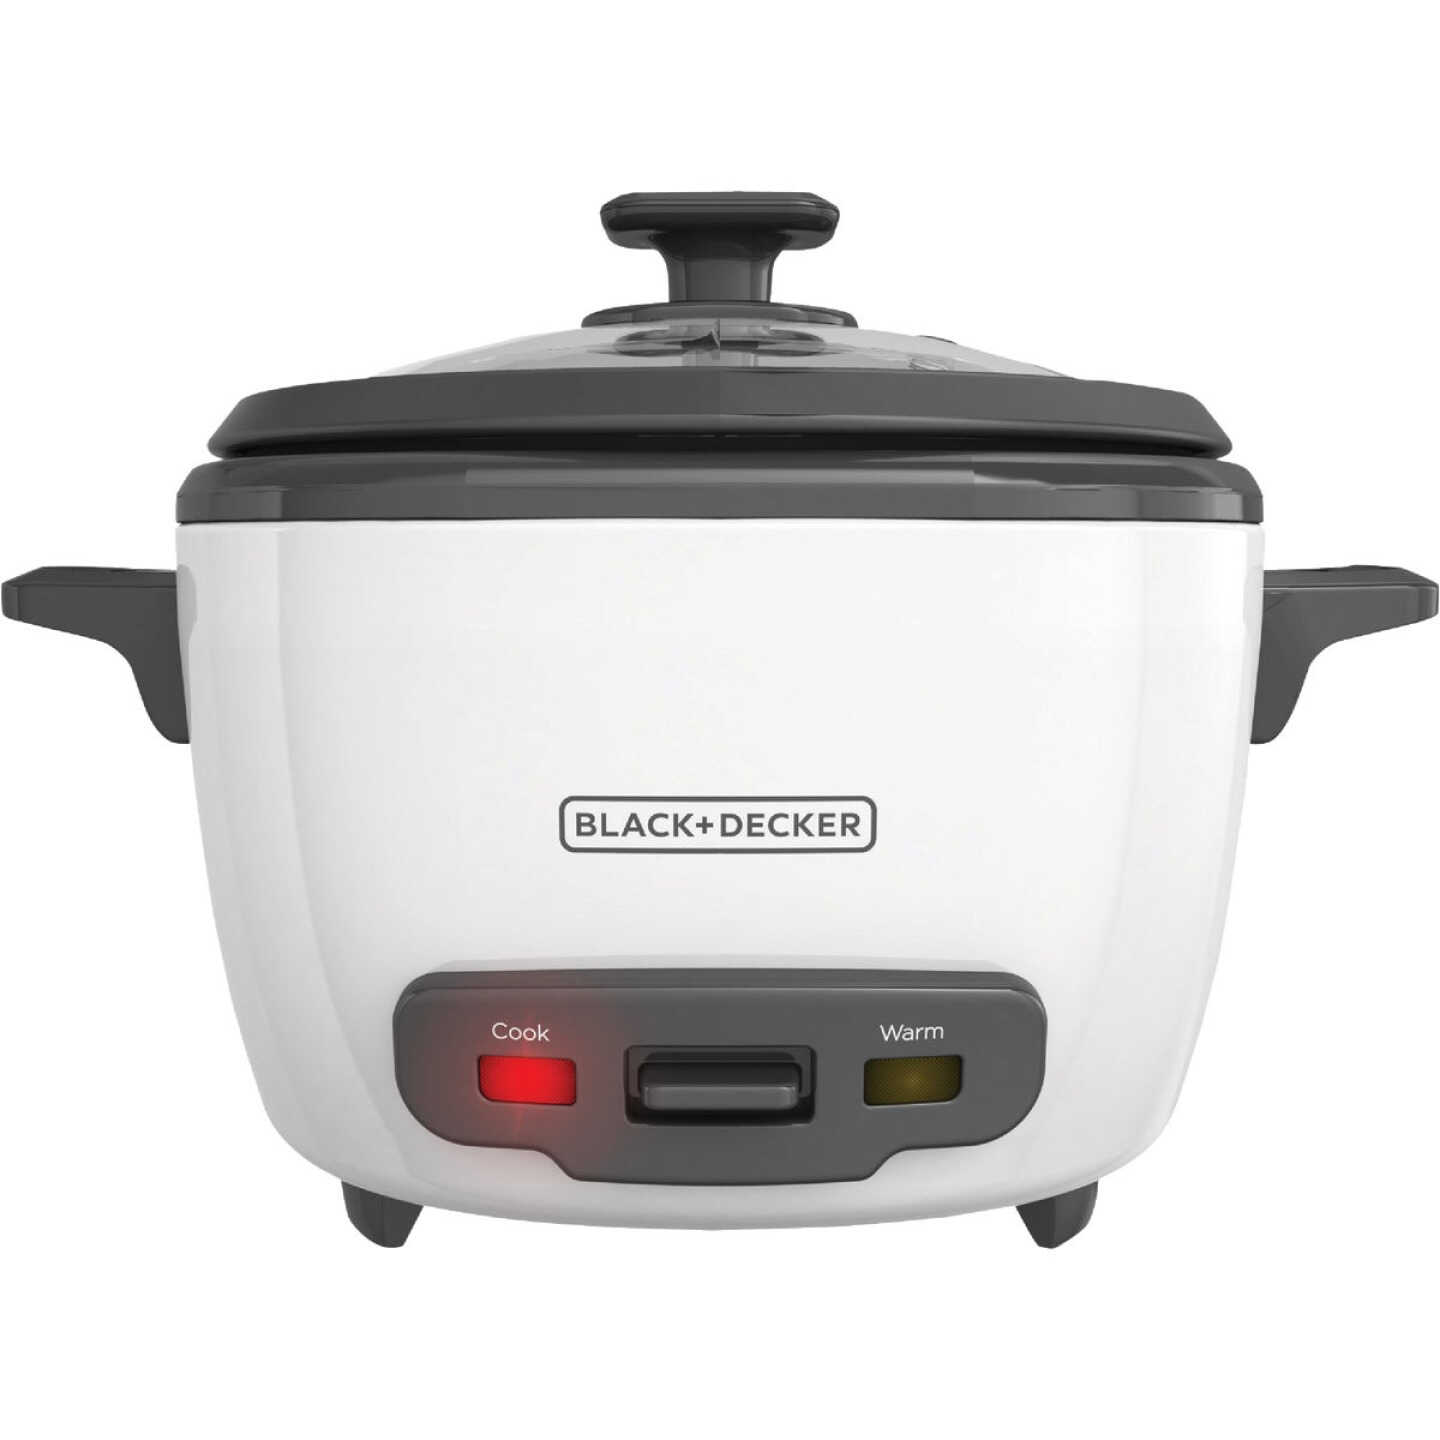 Rise By Dash 2-Cup Mini Rice Cooker - People's Lumber & Hardware